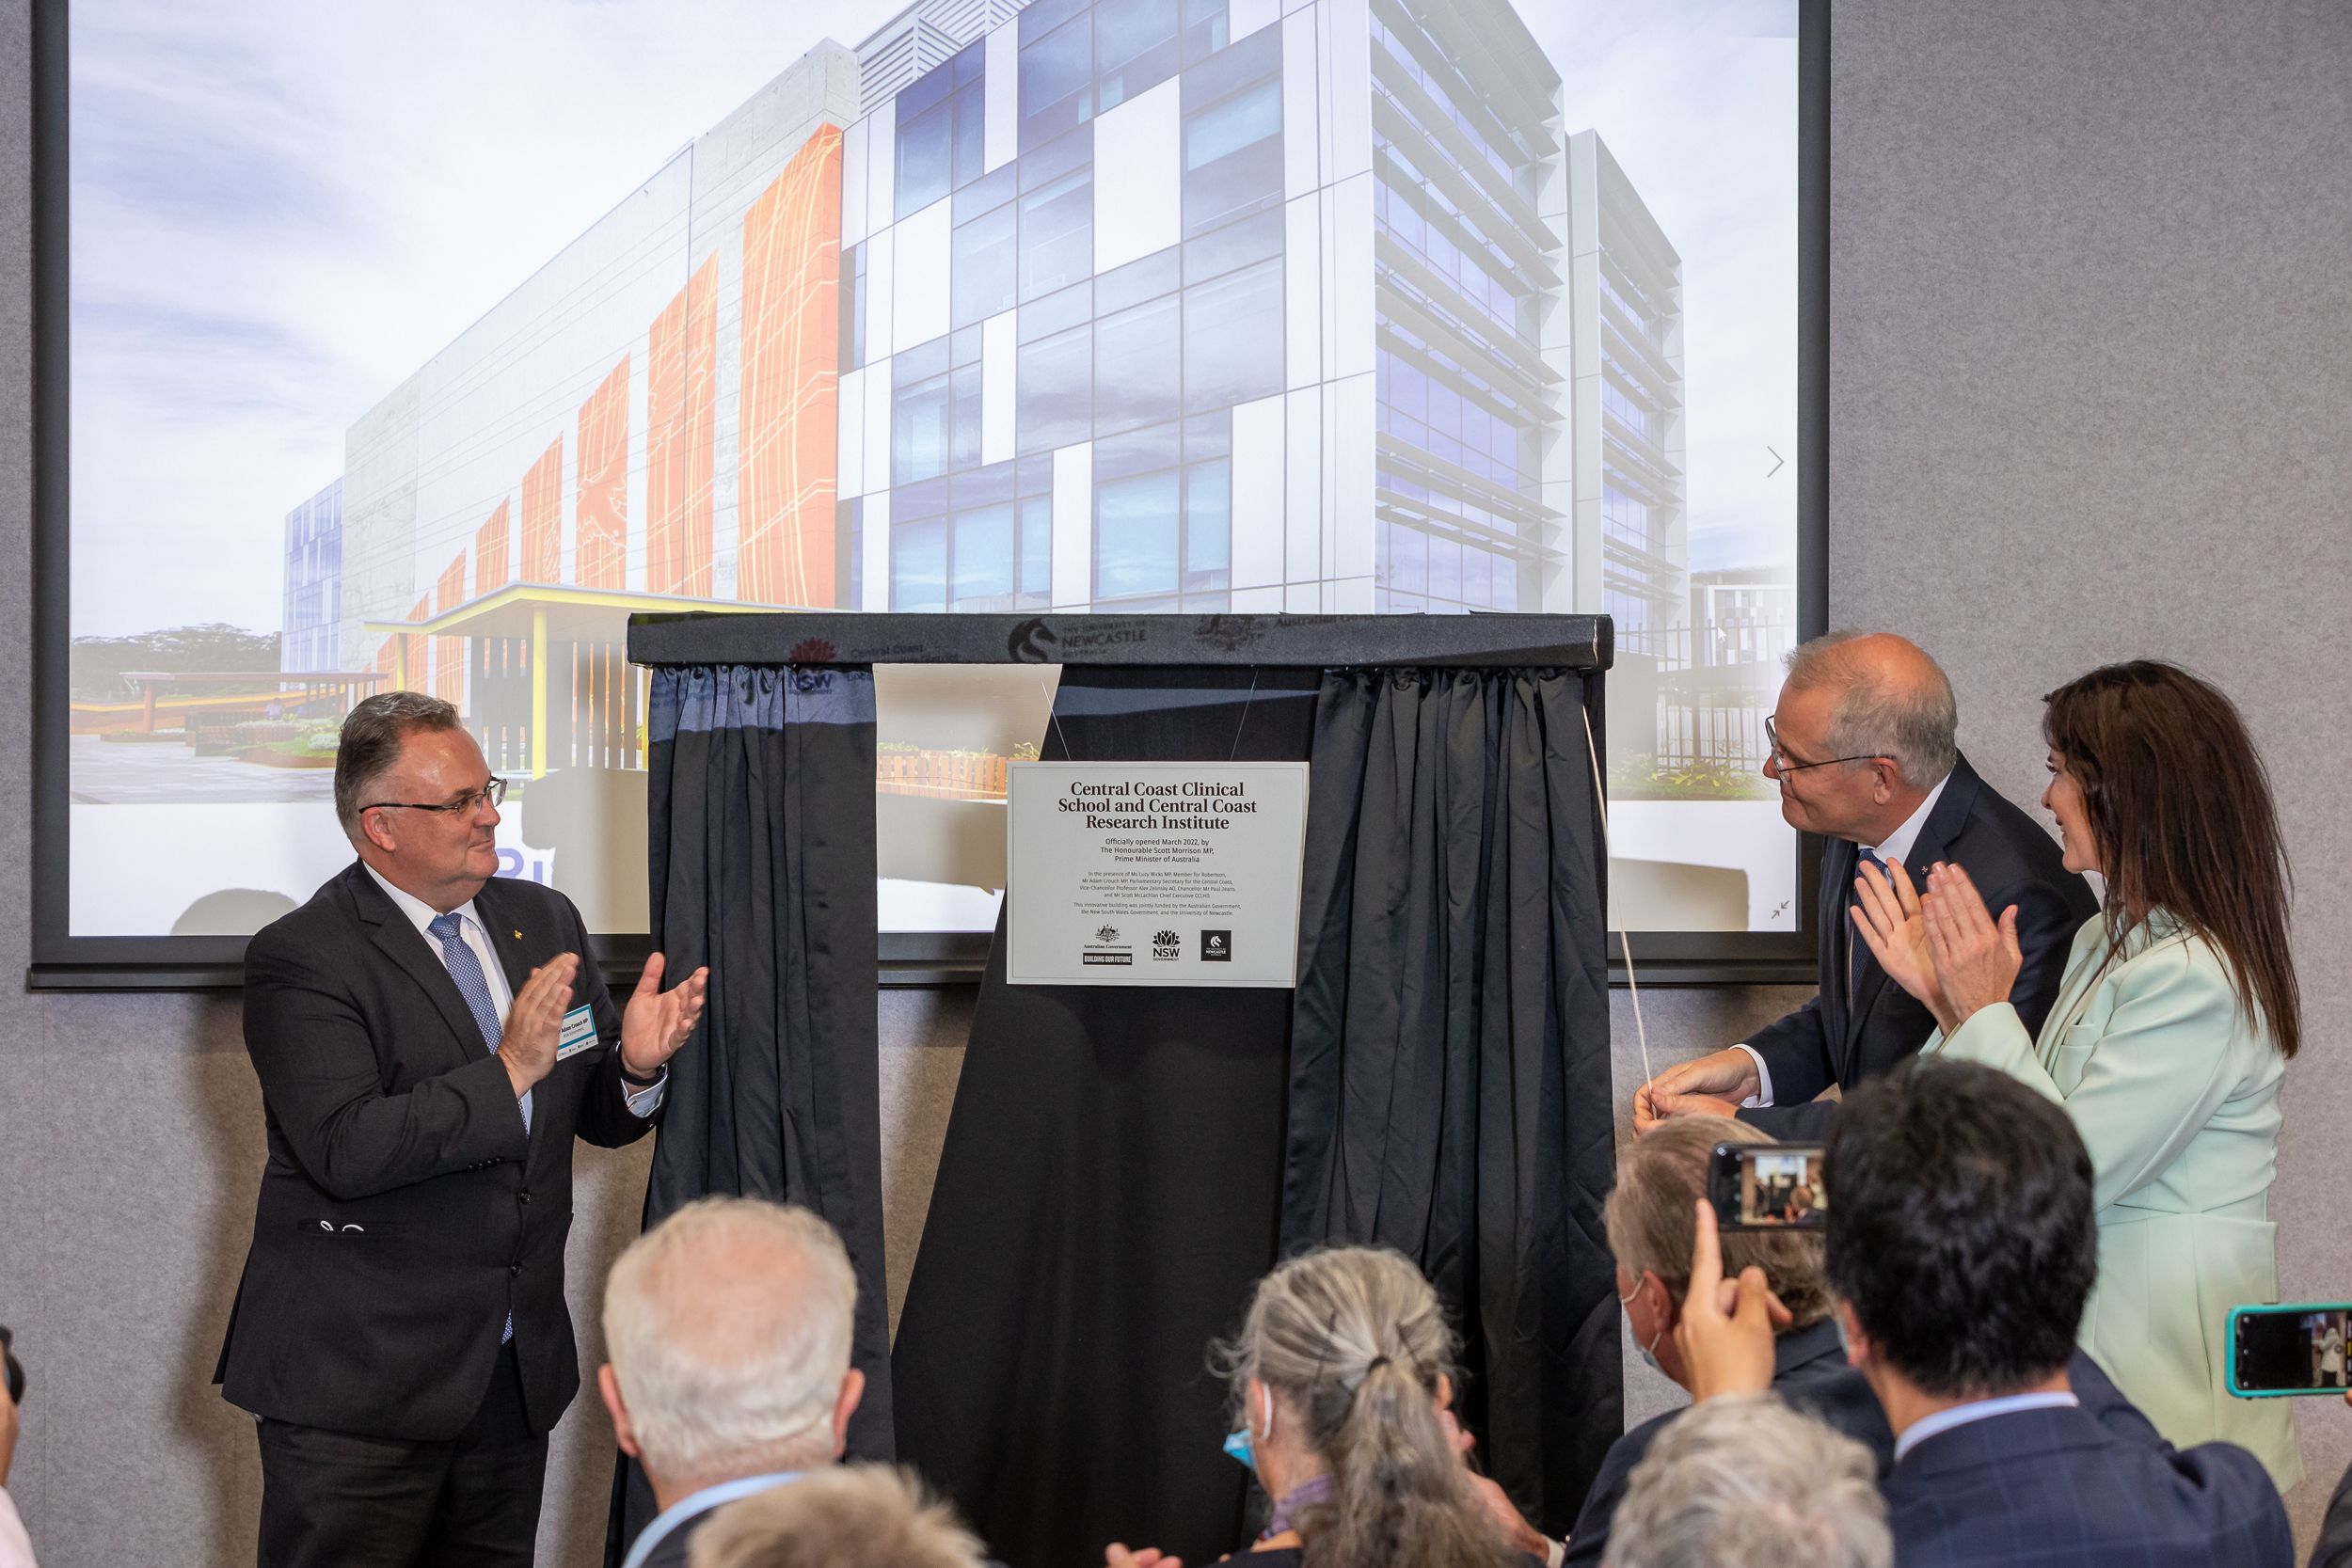 Prime Minister officially opens clinical school and research institute image